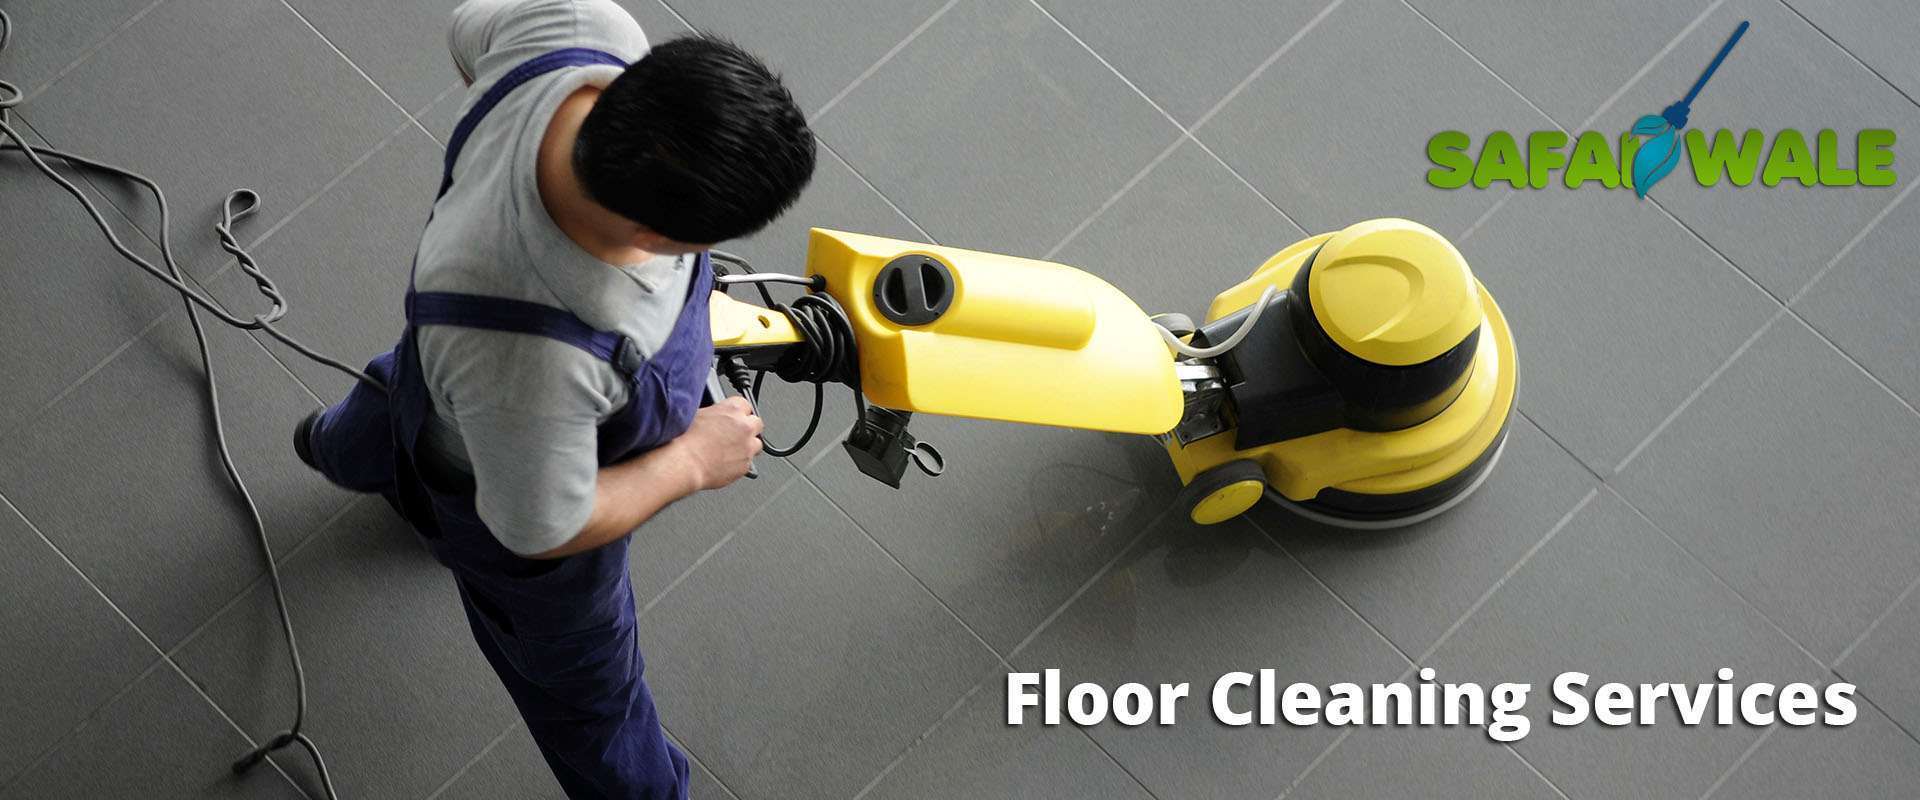 floor cleaning services in Pune